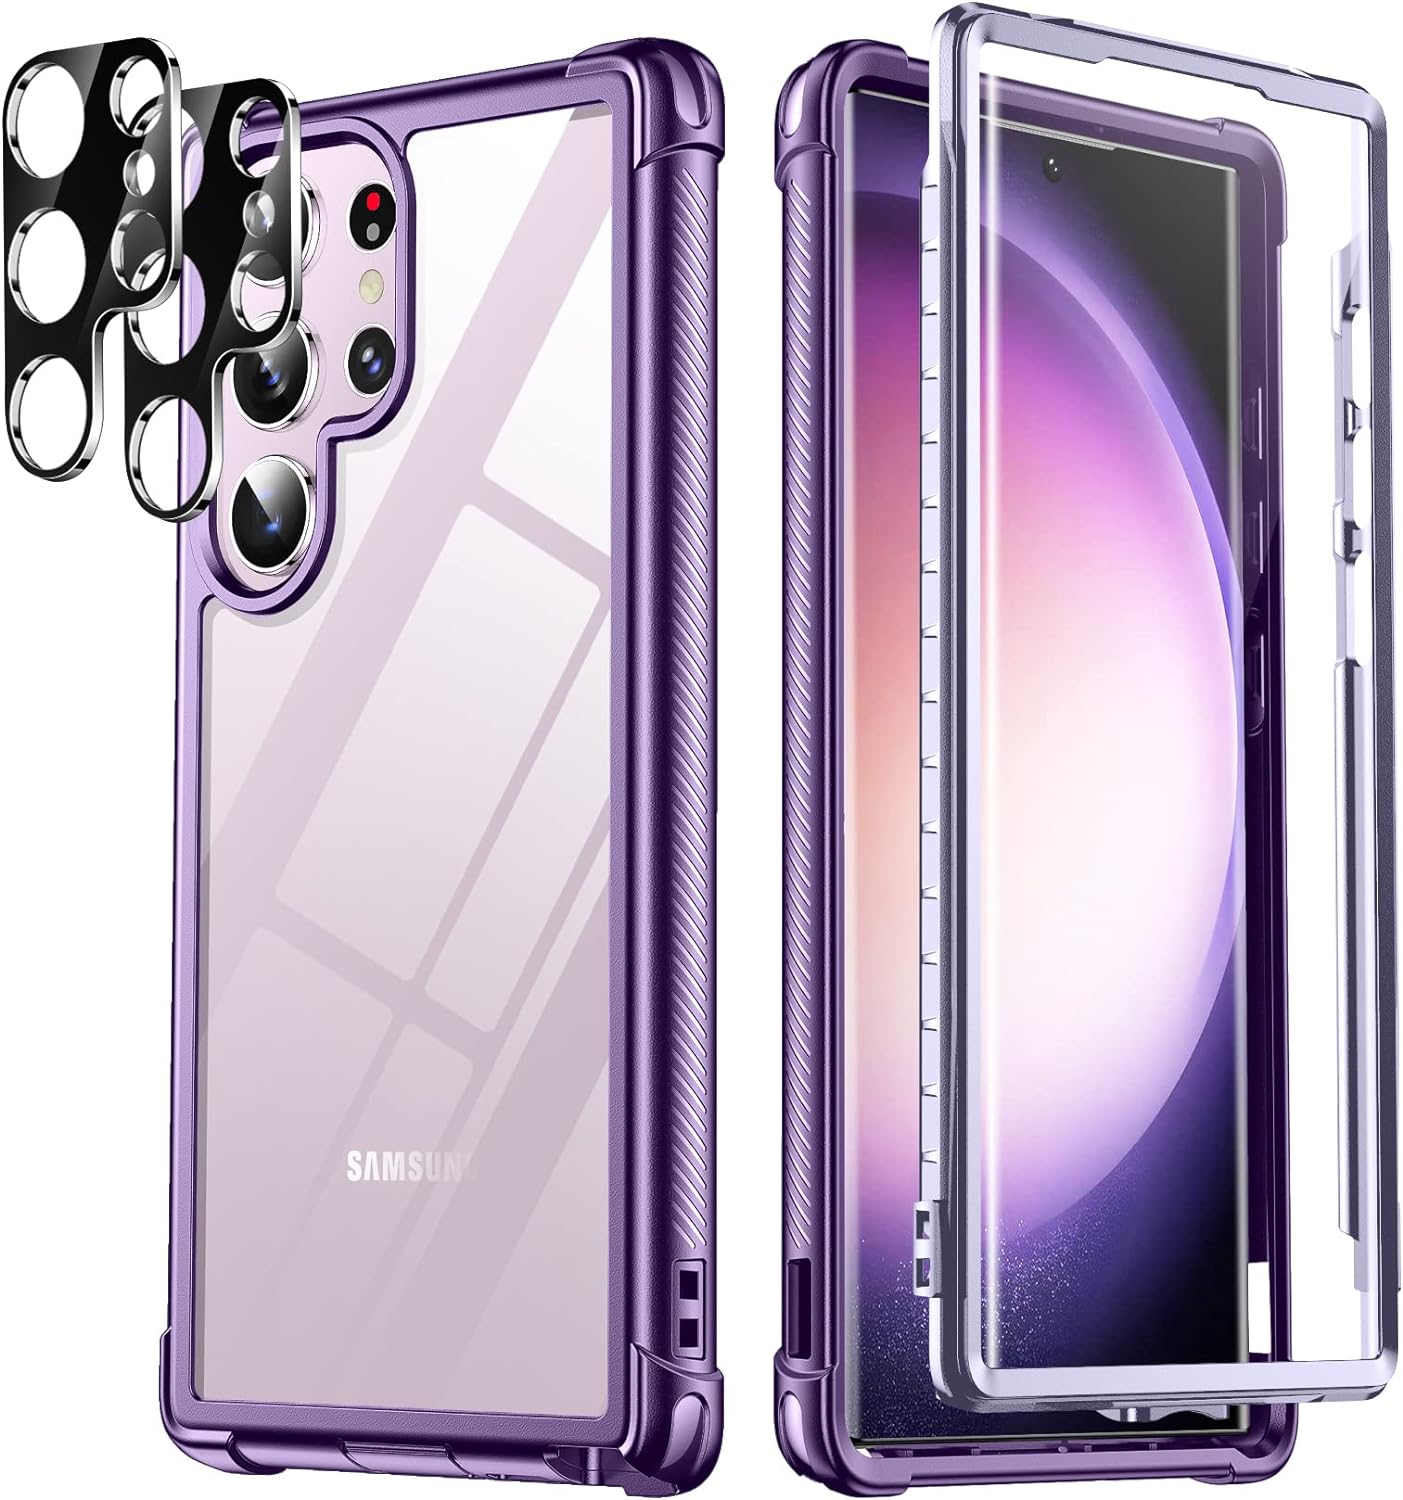 Temdan for Samsung Galaxy S23 Ultra Case, [Built-in Screen Protector]+[2Pcs Lens Protector][Touch Sensitive][Anti-Scratch][Military Grade Shockproof] Full Body Protection Case for S23 Ultra 5G,Purple